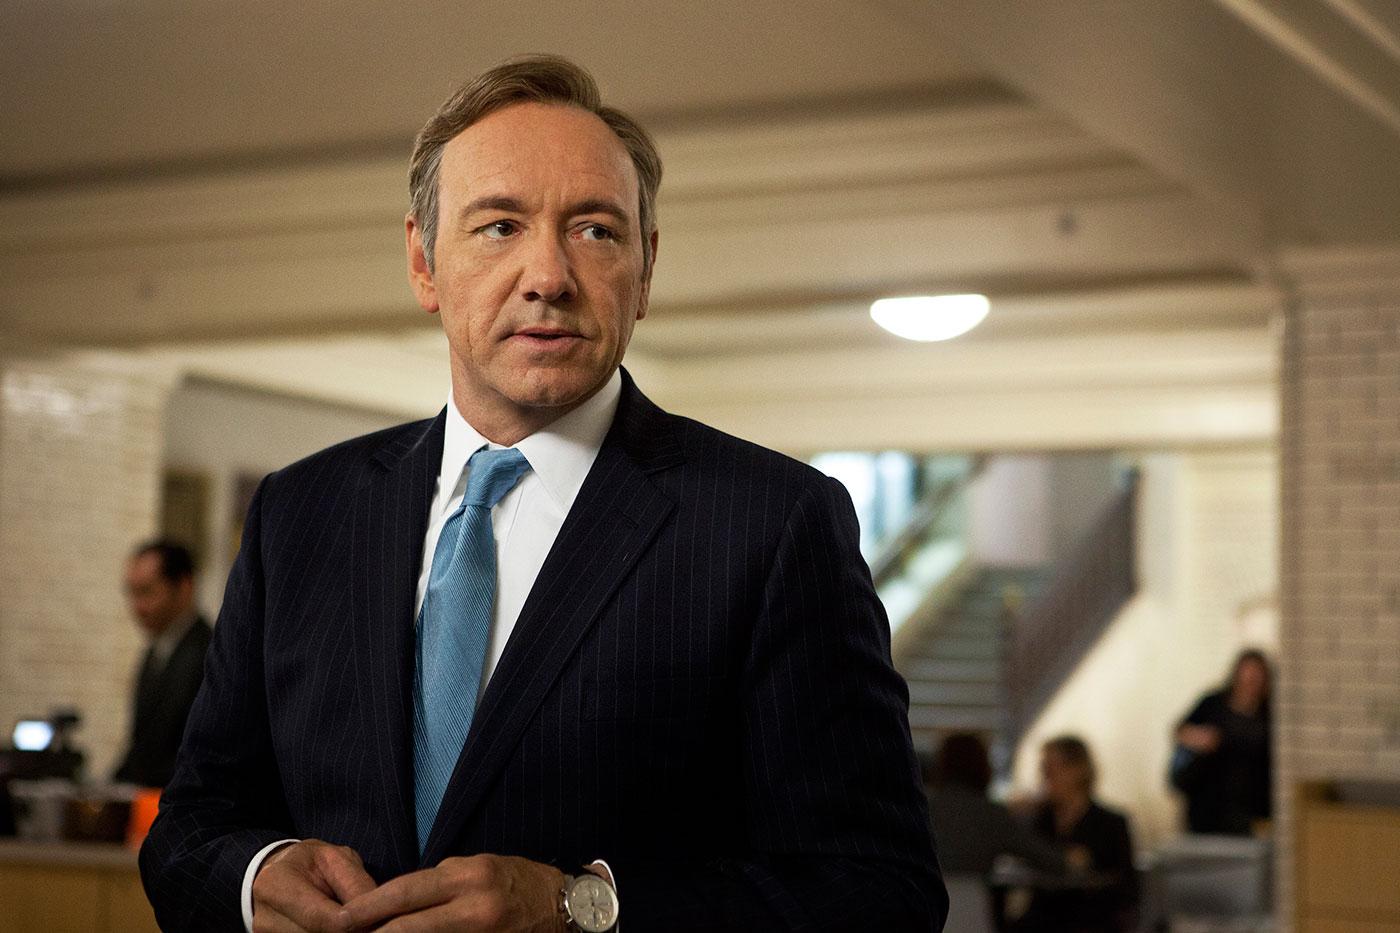 Kevin Spacey som Frank Underwood i Netflix-serien ”House of cards”.